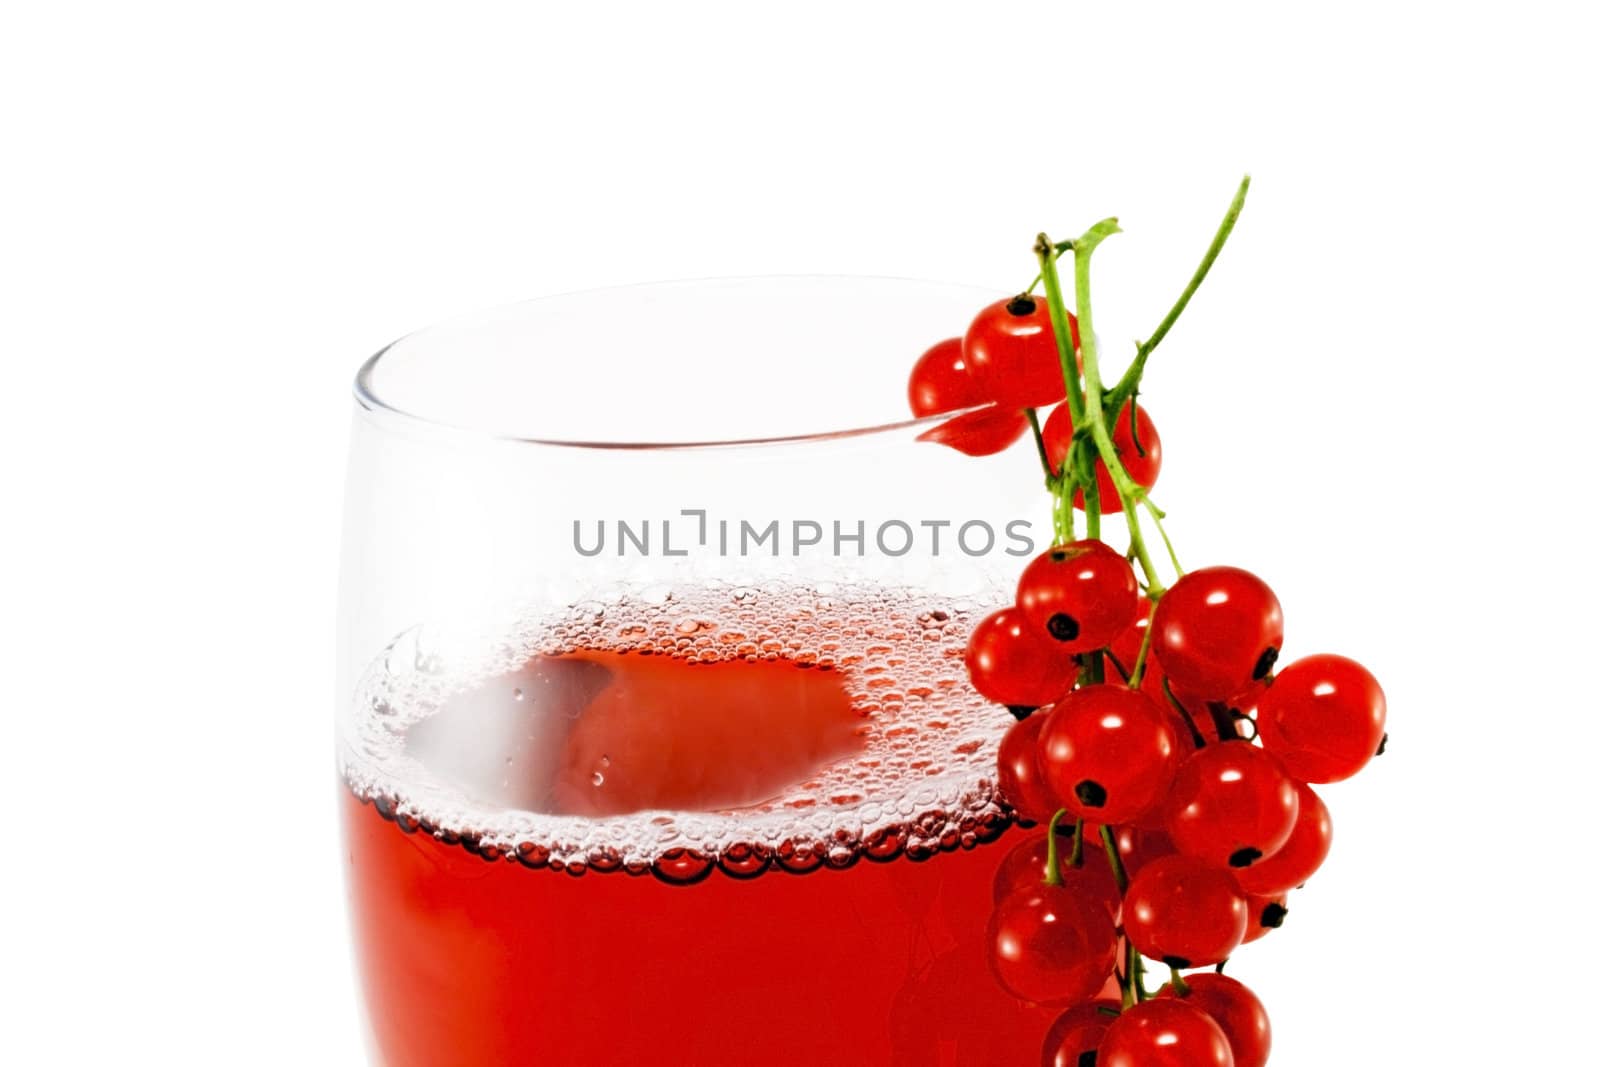 Glass cup with red currant juice isolated on white